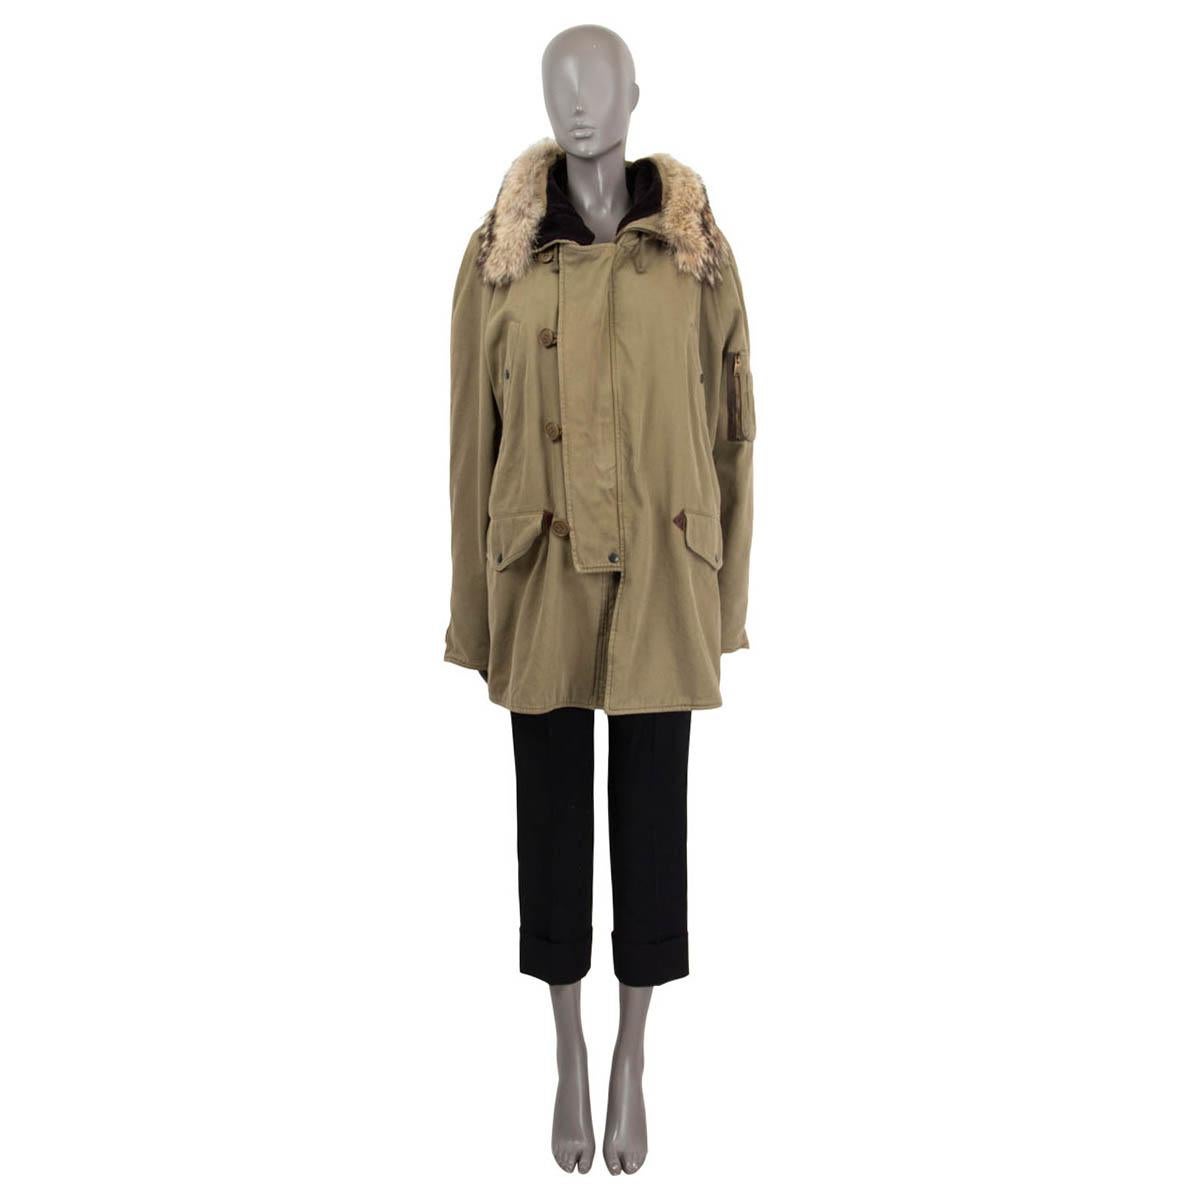 100% authentic Saint Laurent parka in olive green cotton (100%) with a coyotte fur (100%) hood. Features a drawstring at the inside waist, two buttoned flap pockets and two buttoned slit pockets on the front. Has long raglan sleeves (sleeve